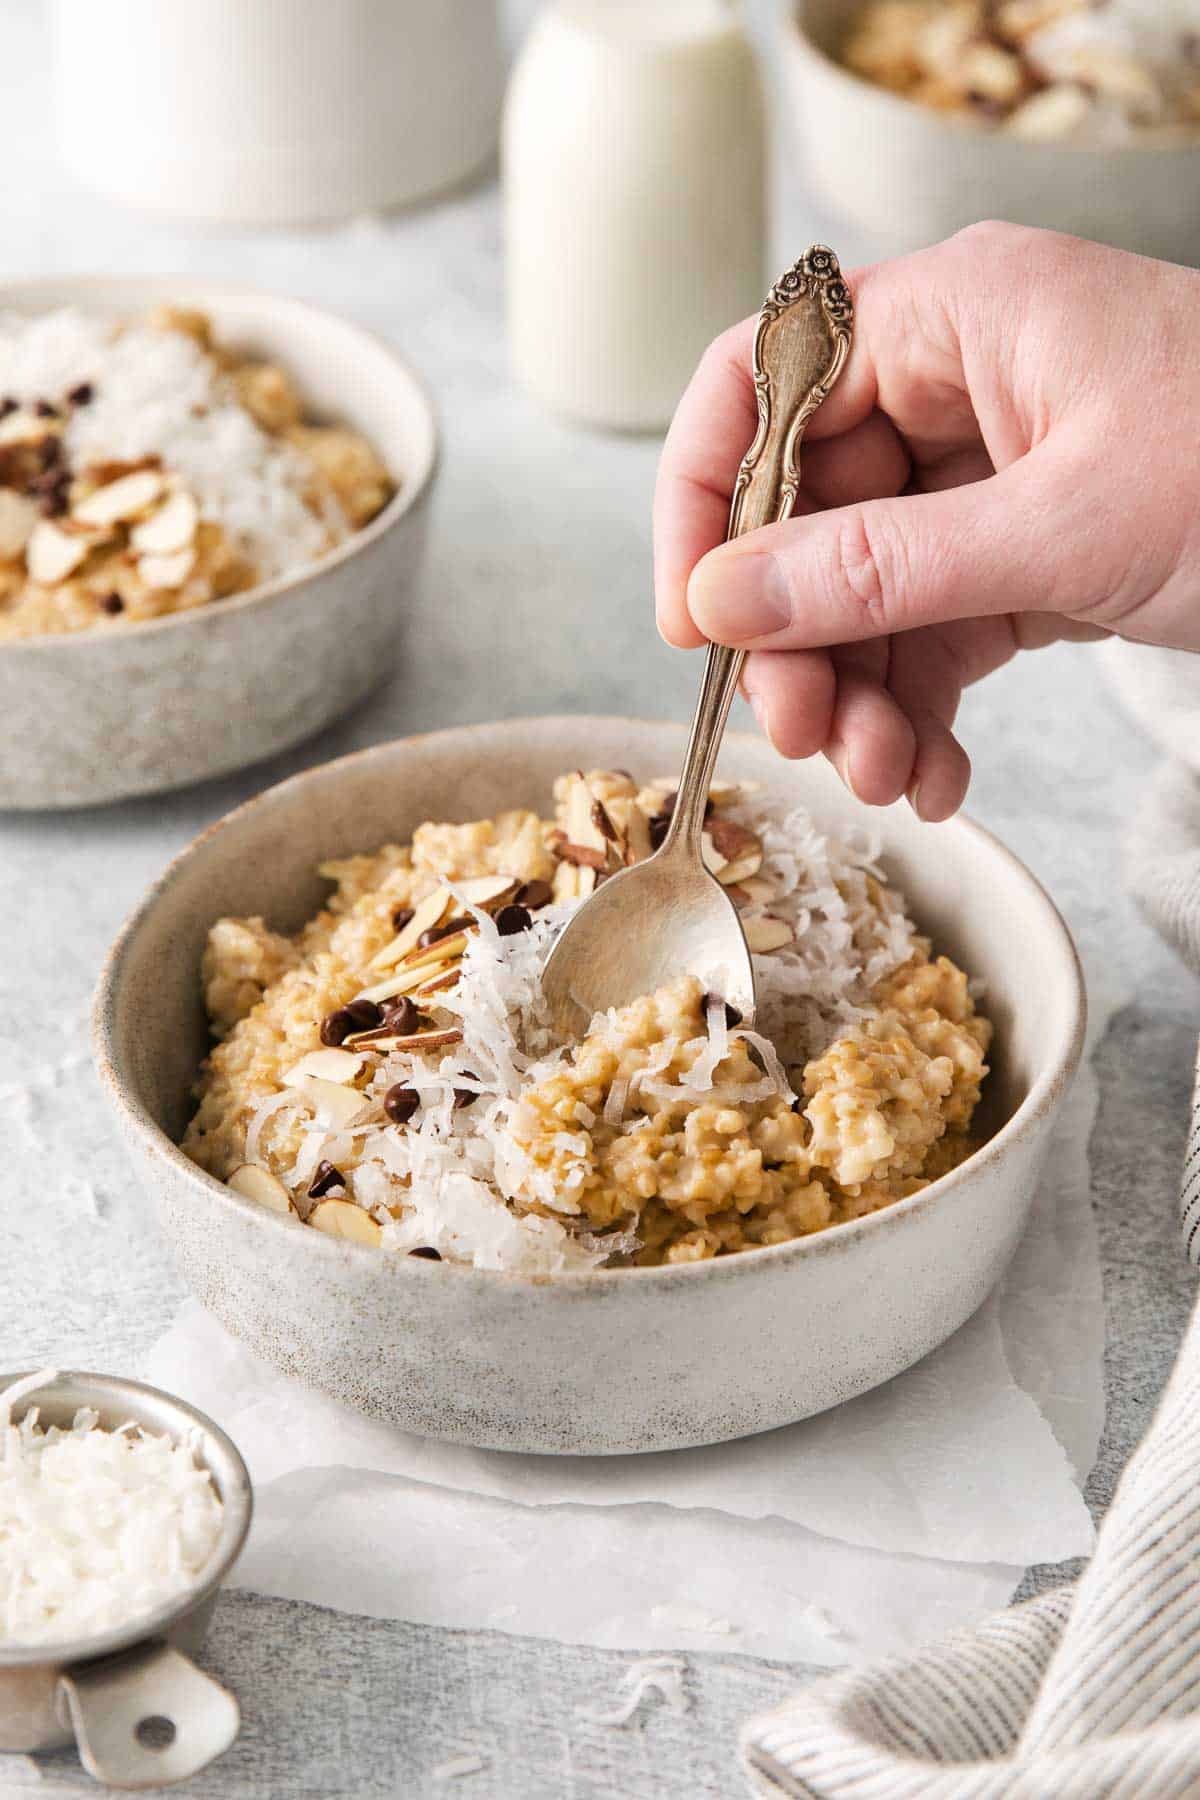 A bowl of steel cut oats, and a hand scooping up a bite with a spoon